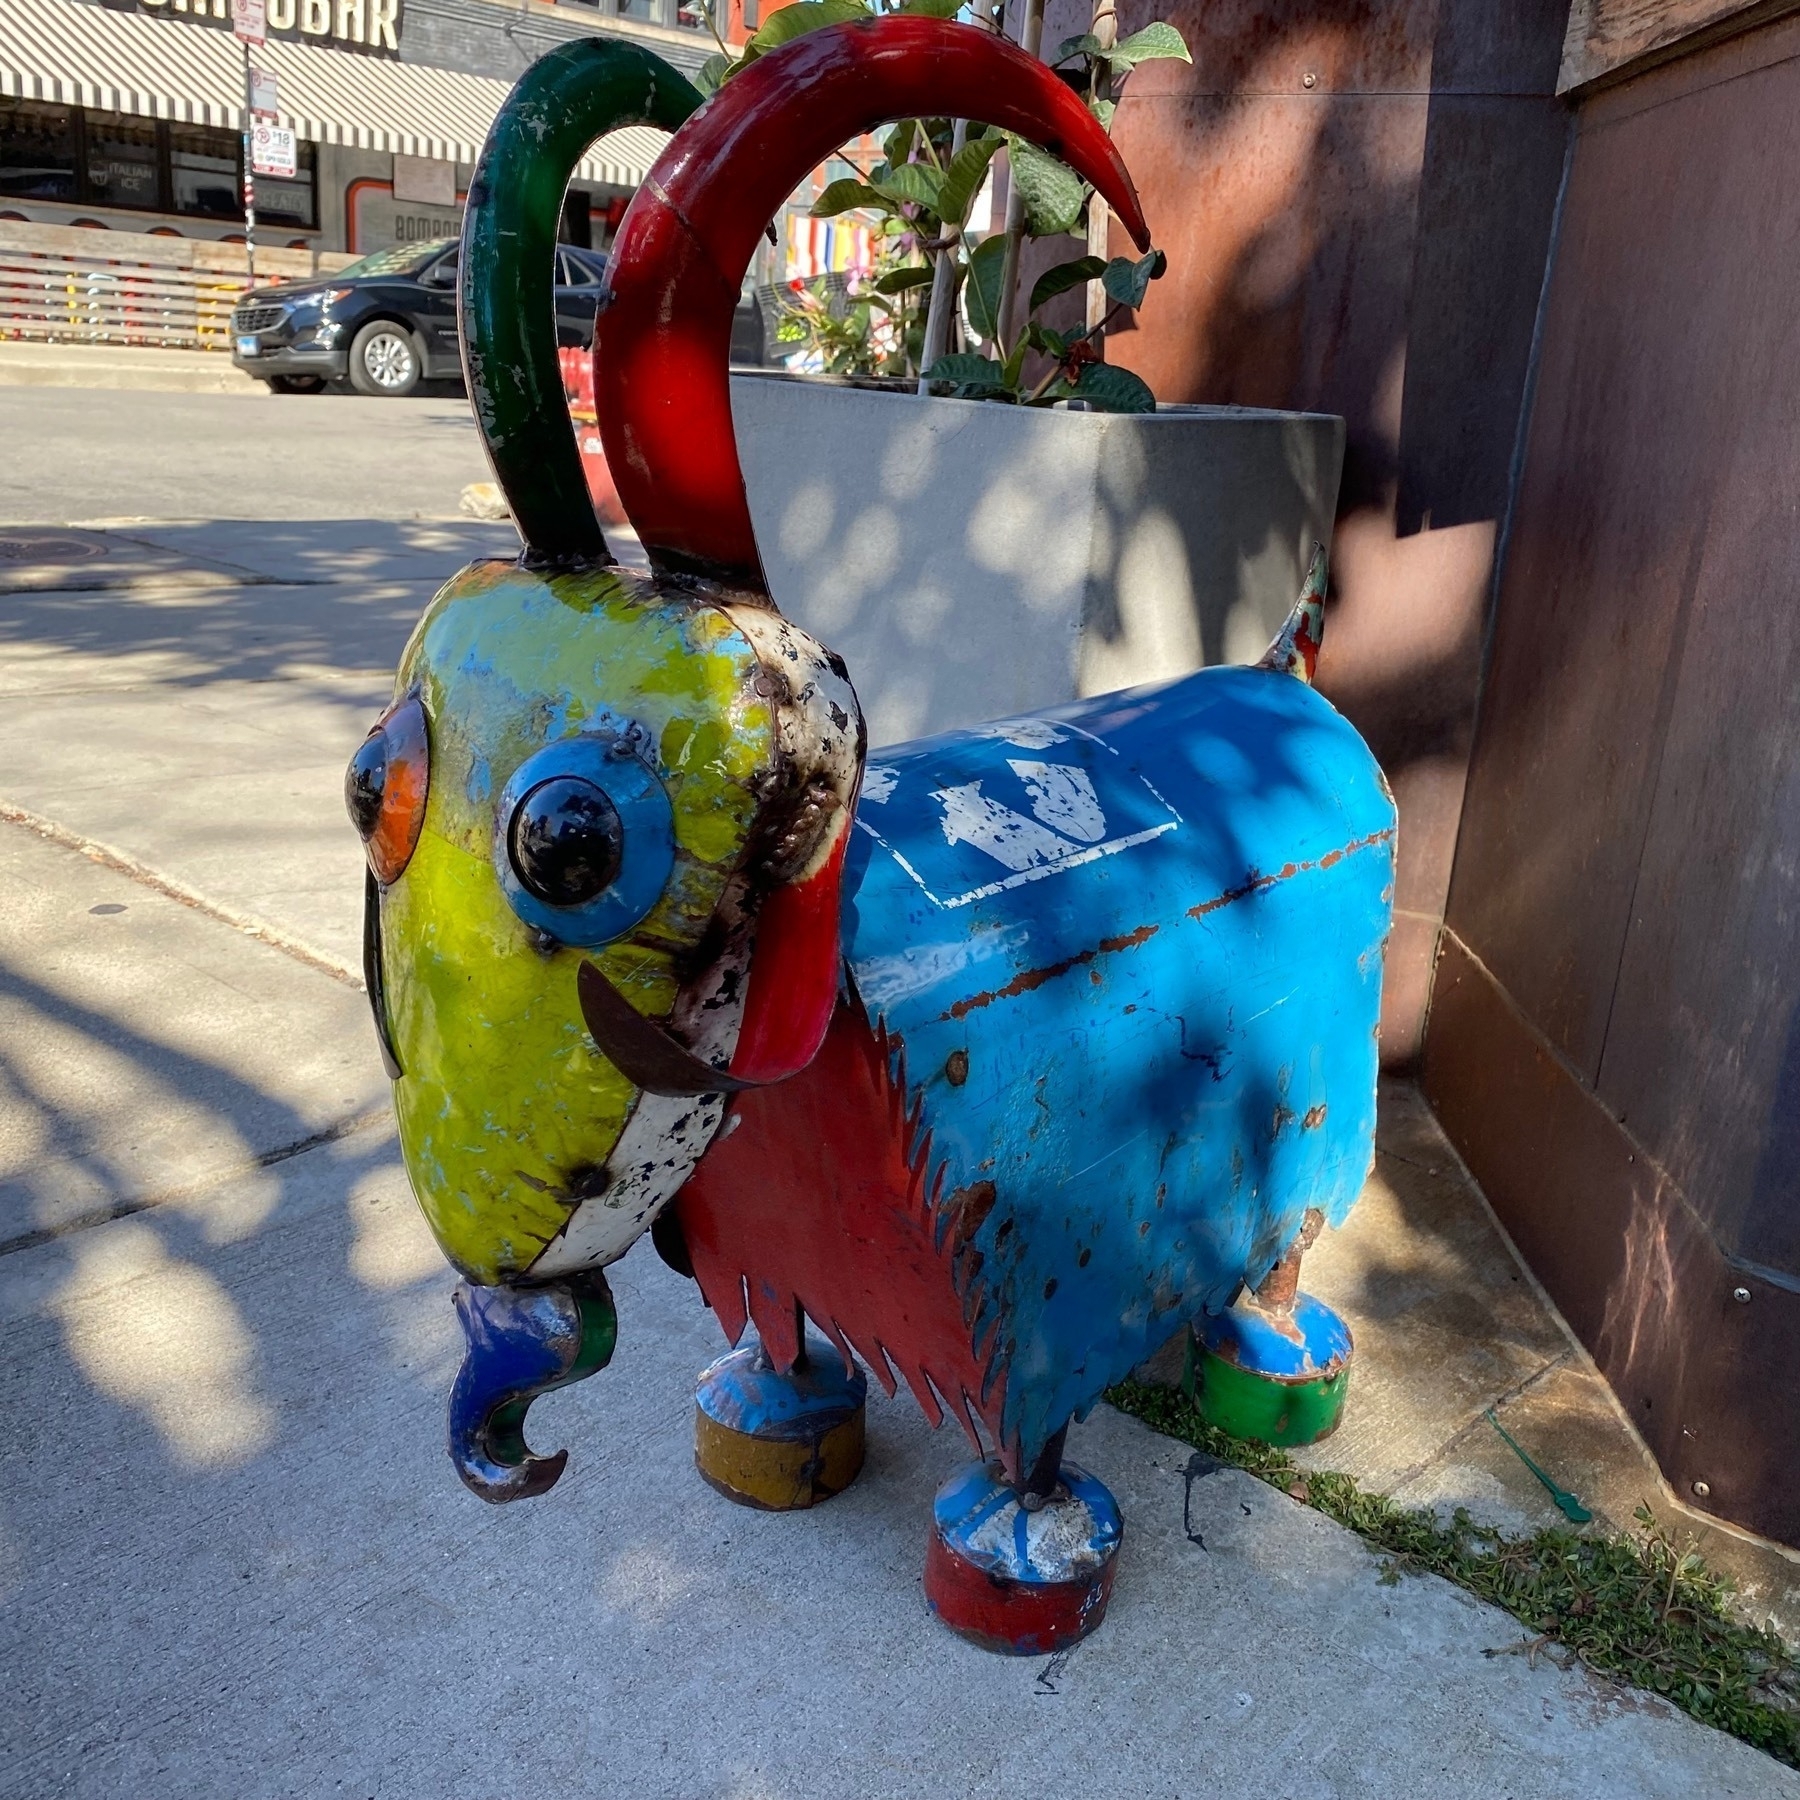 A colorful metal goat sculpture on the sidewalk.